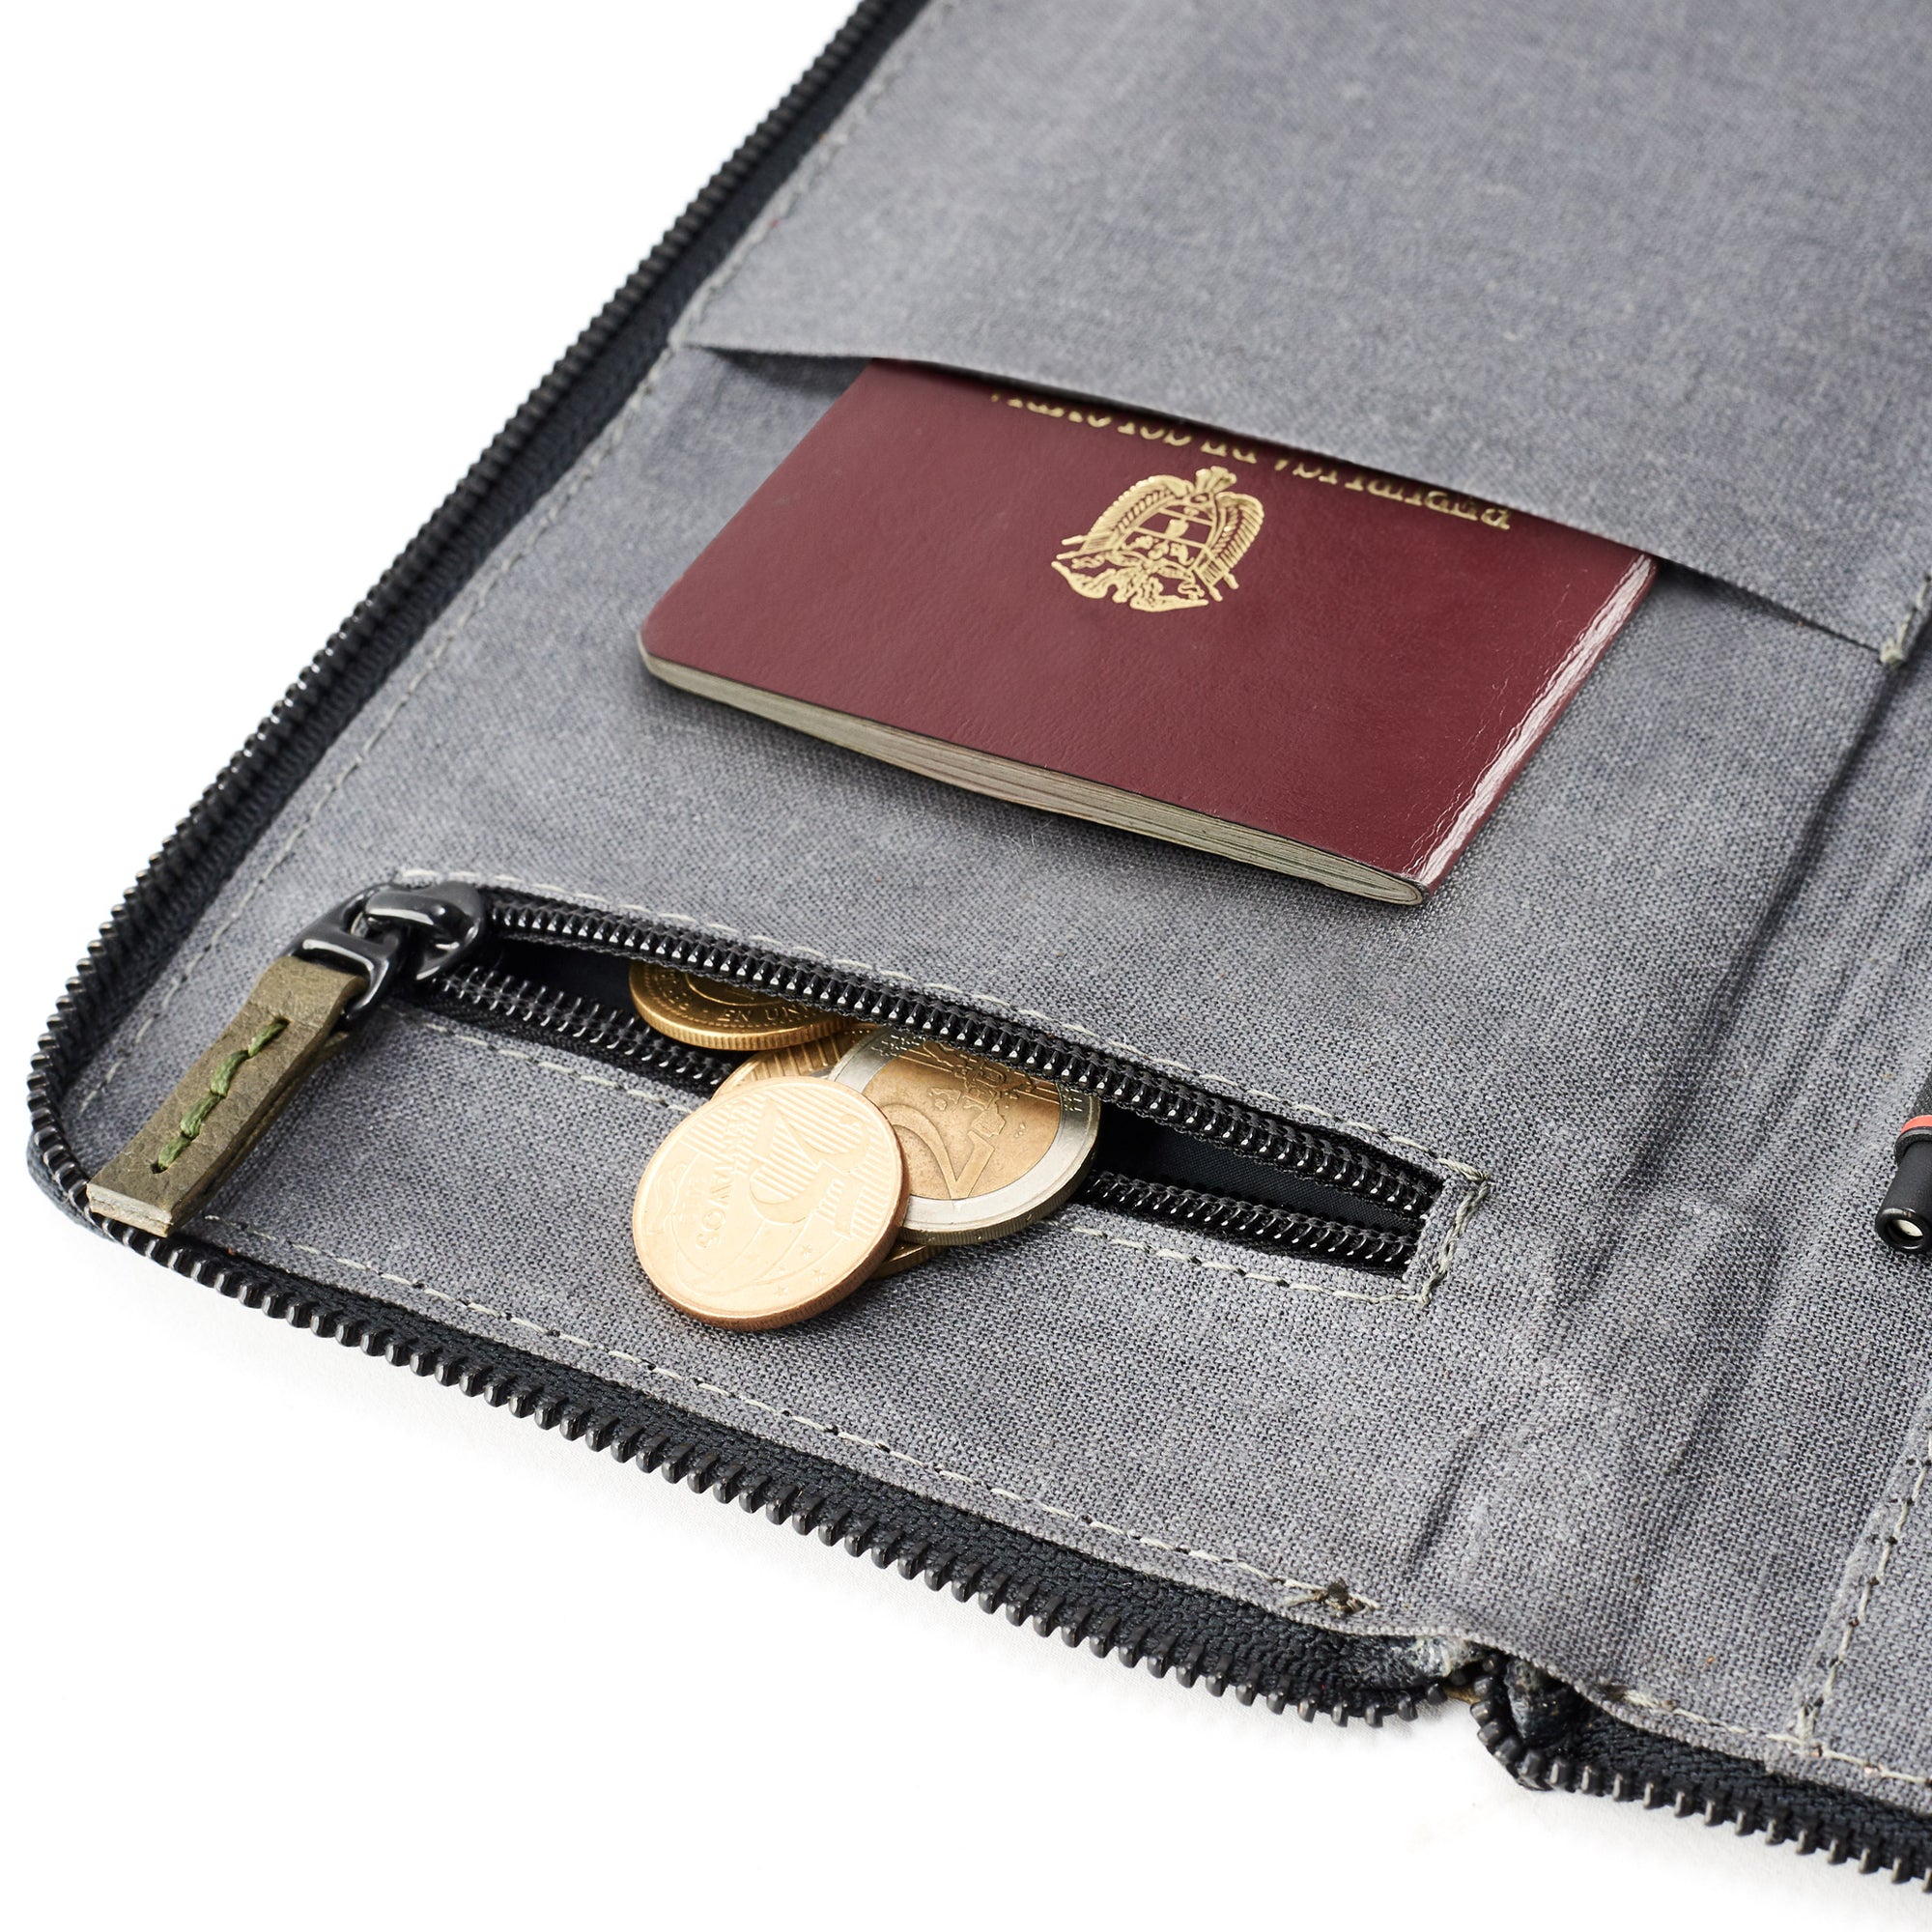 Coins pocket. Green Passport Holder for travelers, document organizer, travel journal by Capra Leather